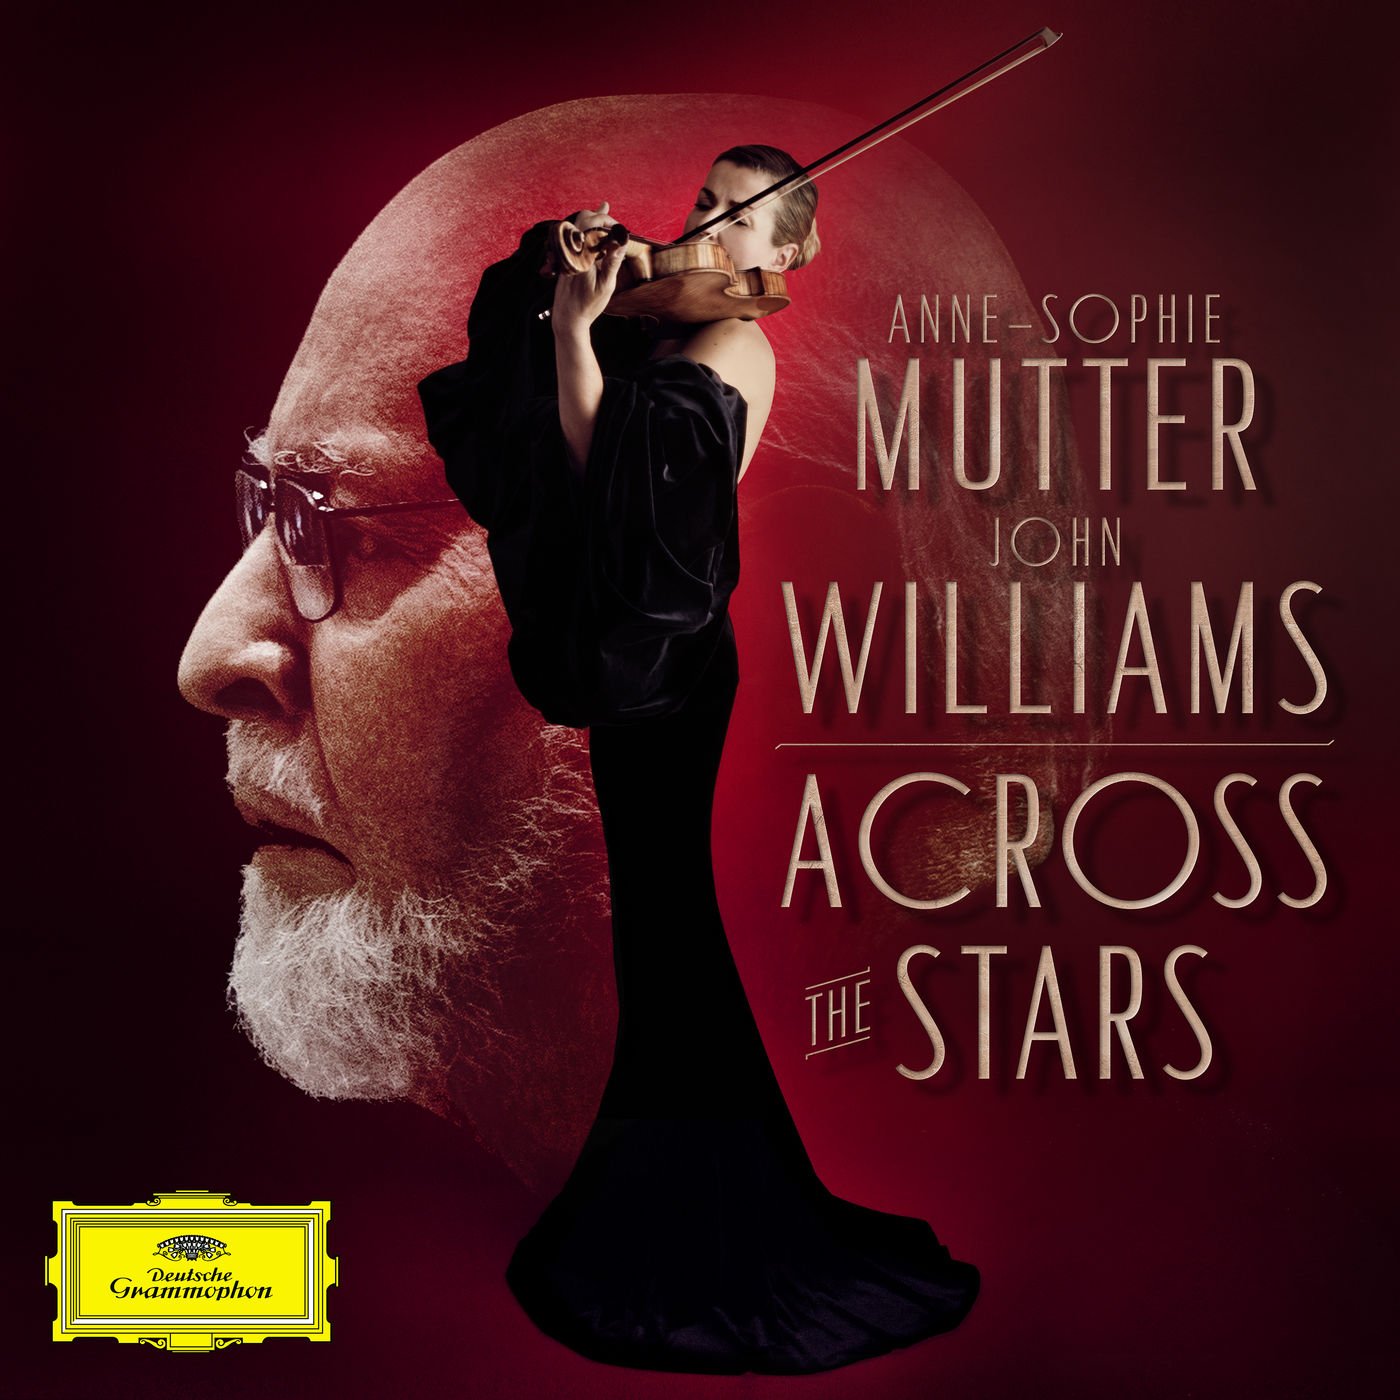 Anne-Sophie Mutter And John Williams-Across The Stars-CD-FLAC-2019-THEVOiD